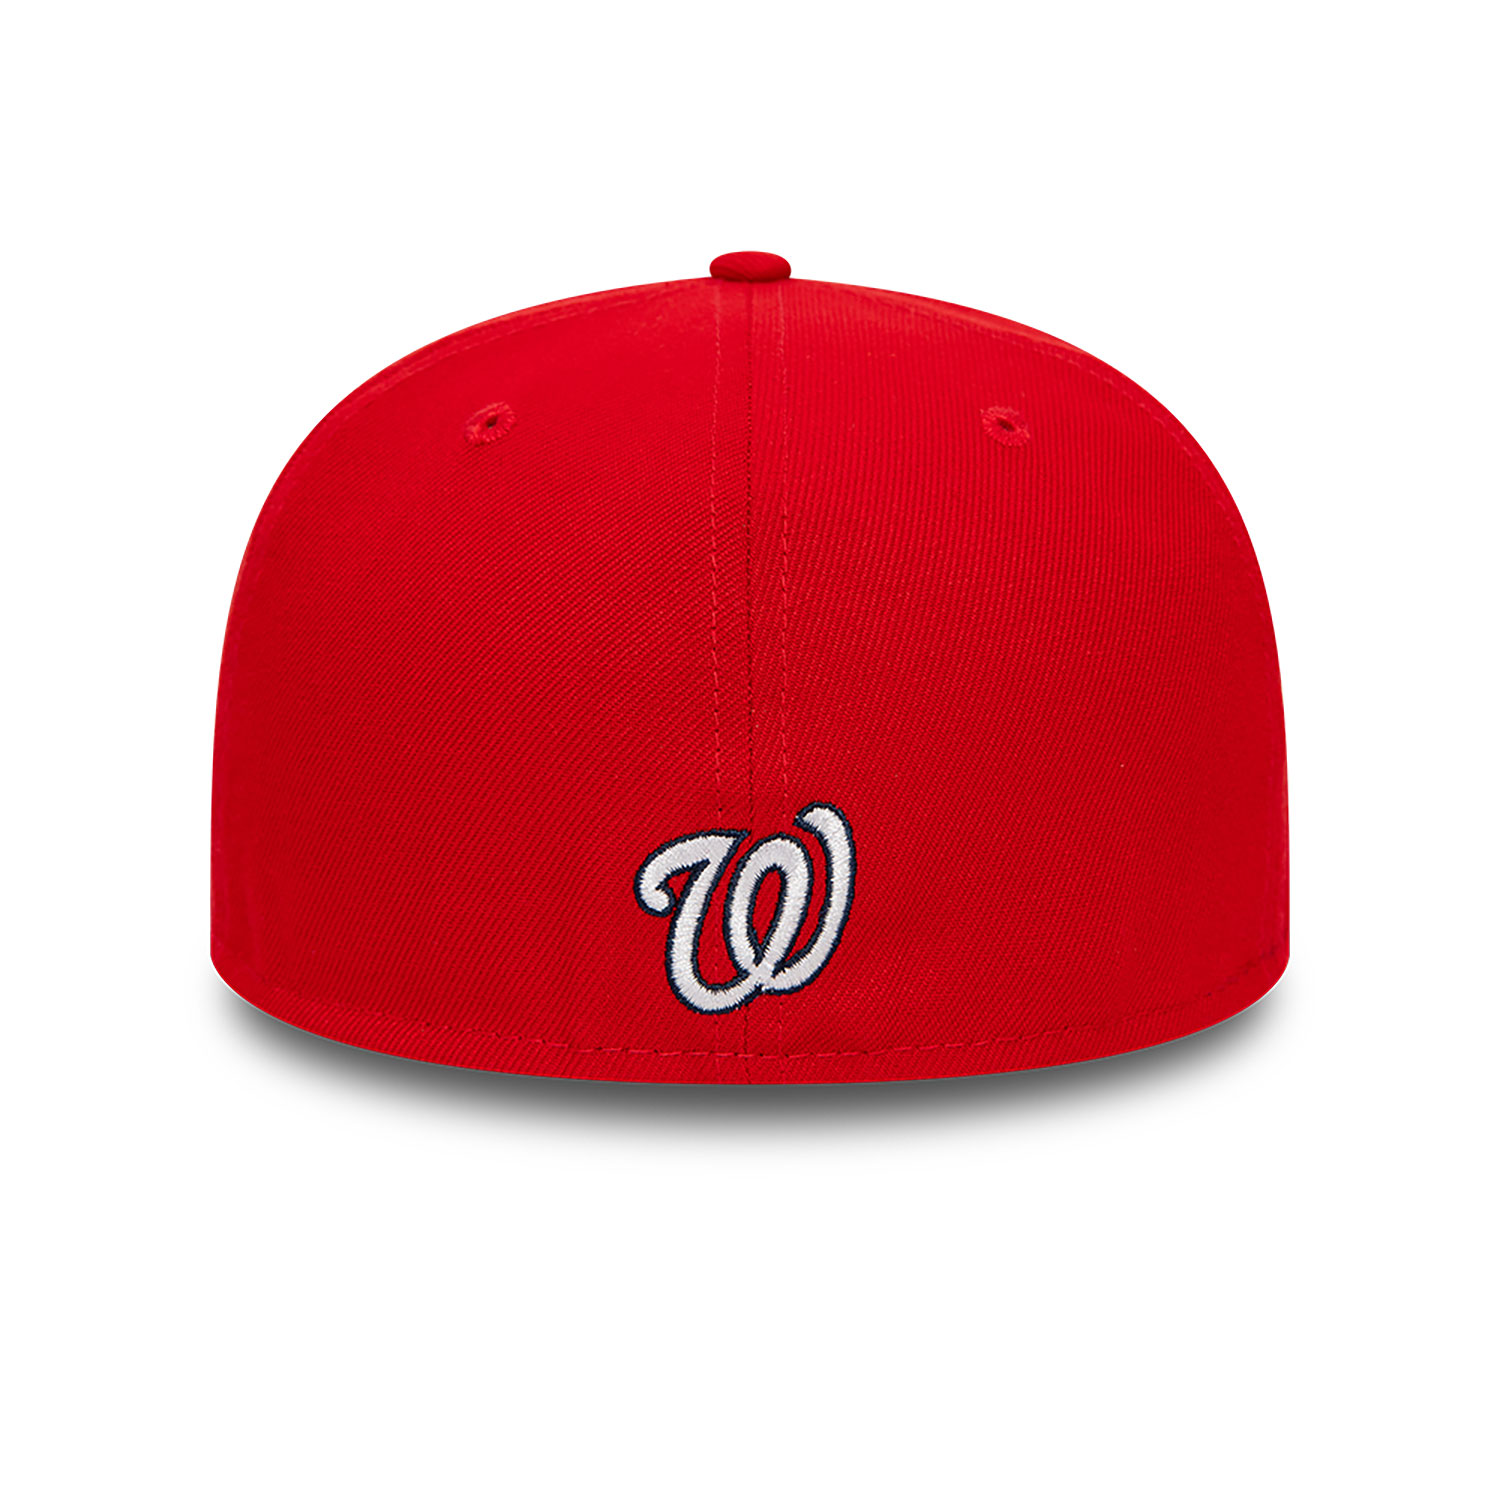 Washington Nationals Team Cloud Red 59FIFTY Fitted Cap